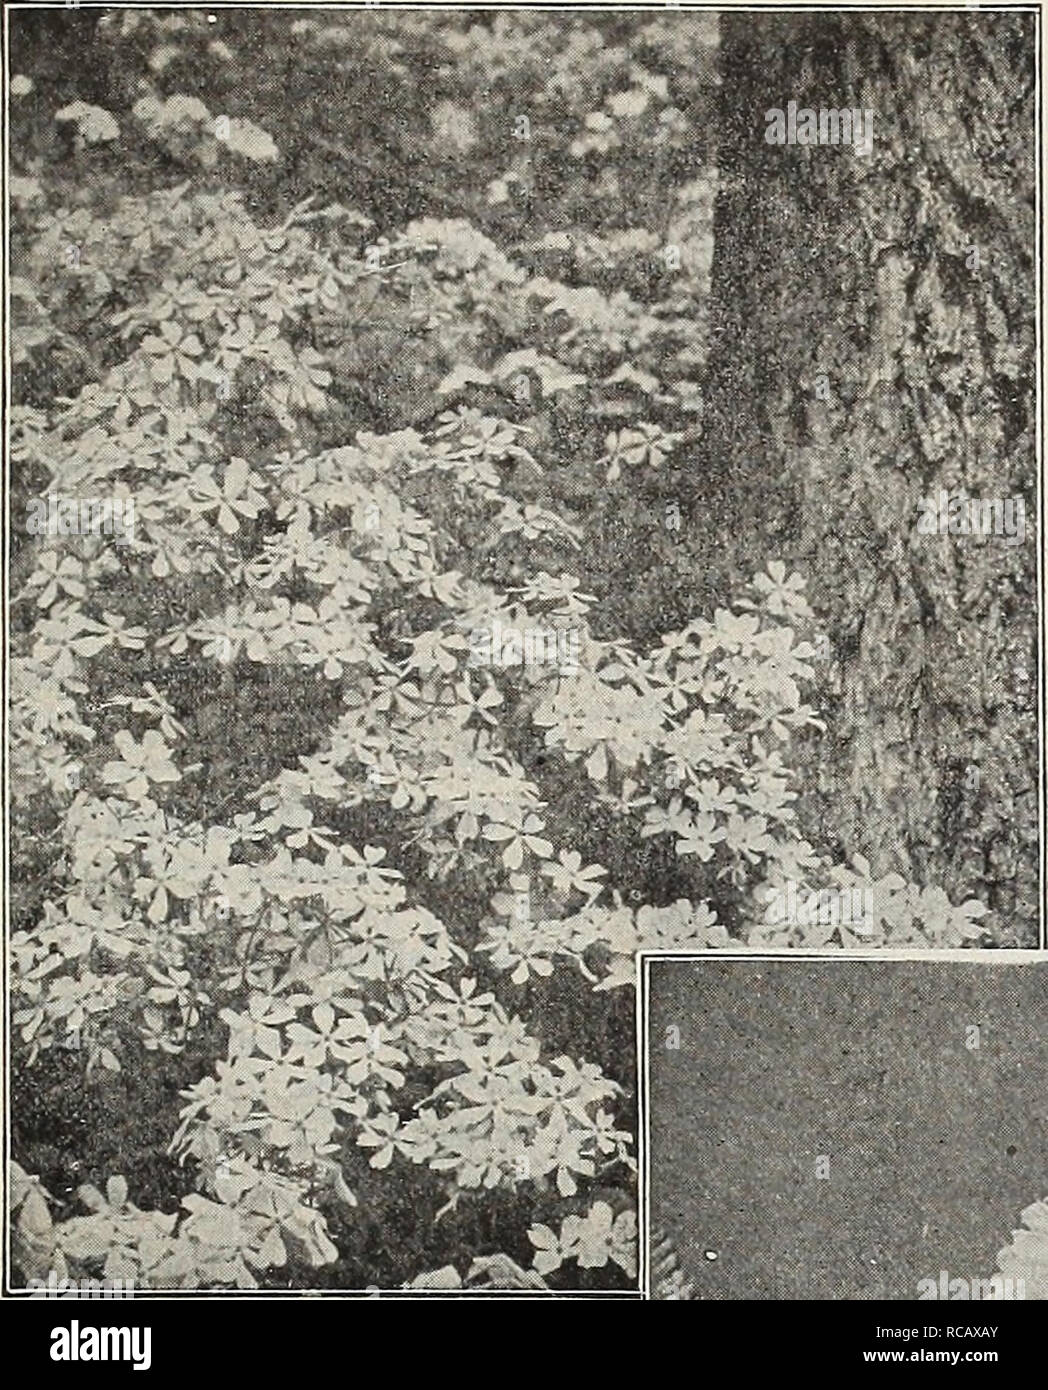 . Dreer's garden book : seventy-third annual edition 1911. Seeds Catalogs; Nursery stock Catalogs; Gardening Equipment and supplies Catalogs; Flowers Seeds Catalogs; Vegetables Seeds Catalogs; Fruit Seeds Catalogs. irHWADREER-PHIIAD!LPt1IAmlM HARDY PERENH1AL PbANtt 233. Phlox Divaricata Canadhnsis. HARDY GARDEN PINKS. Old favorites, bearing their sweet clove-scented flowers in the greatest profusion during May and June. They are indispensable for the edge of the hardy border and for cutting; 1 foot. Comet. Bright rosy-crimson. Diamond. A fine extra early, fringed white, Elsie. Bright rose, mar Stock Photo